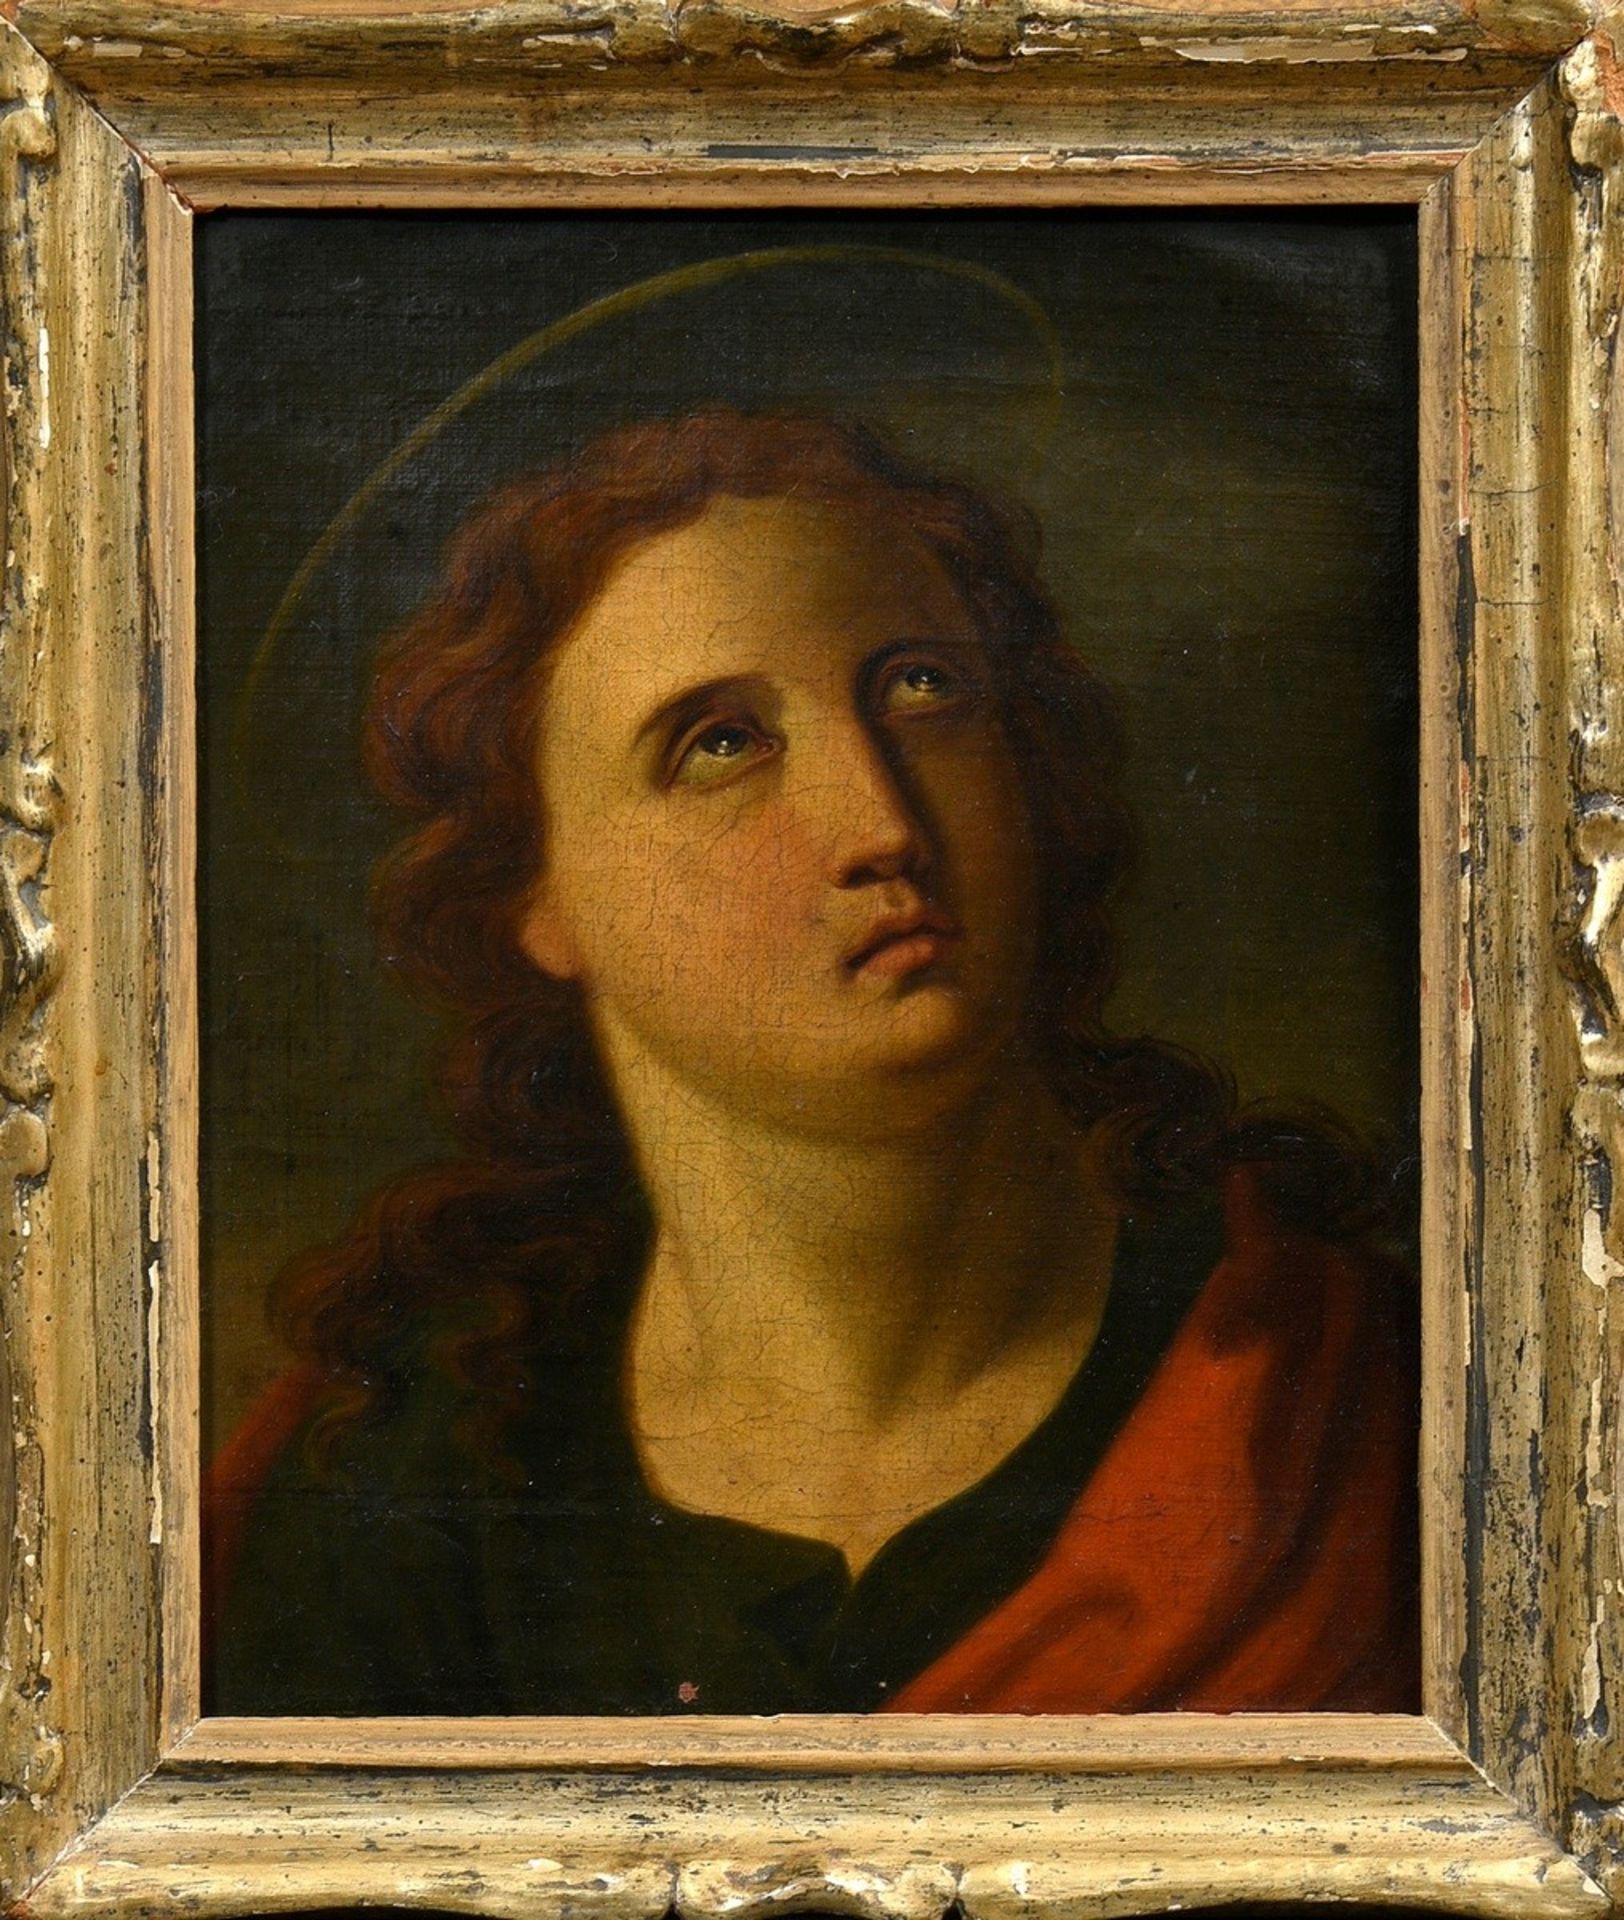 Unknown painter of the 18th c. "Evangelist", oil/canvas, verso old adhesive label "Galerie Commeter - Image 2 of 4